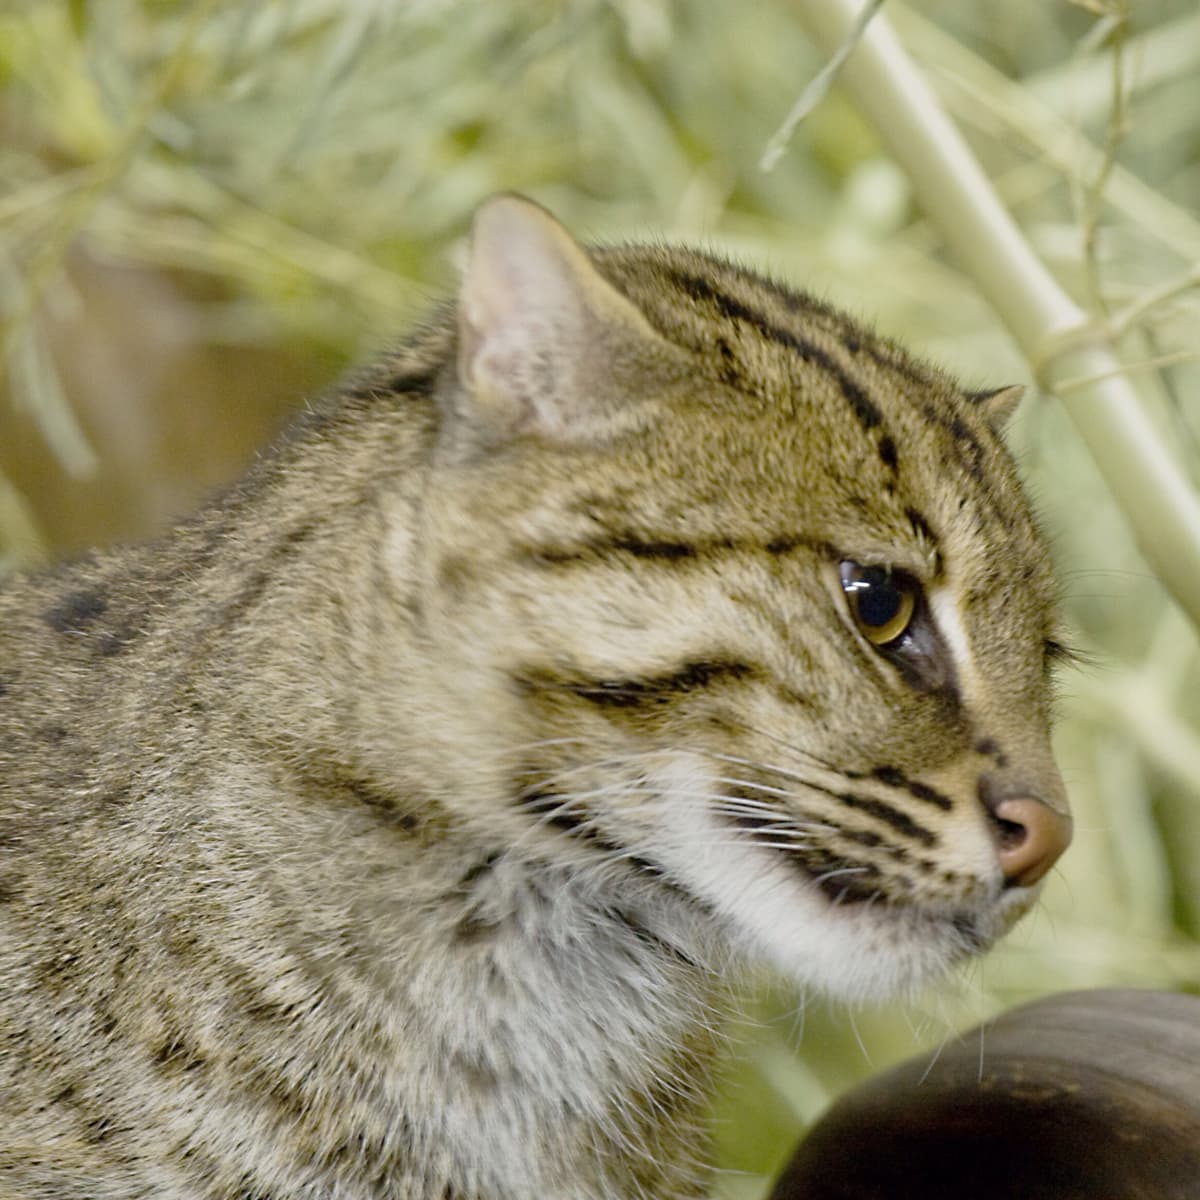 The Fishing Cat: An Interesting and Vulnerable Animal in Asia